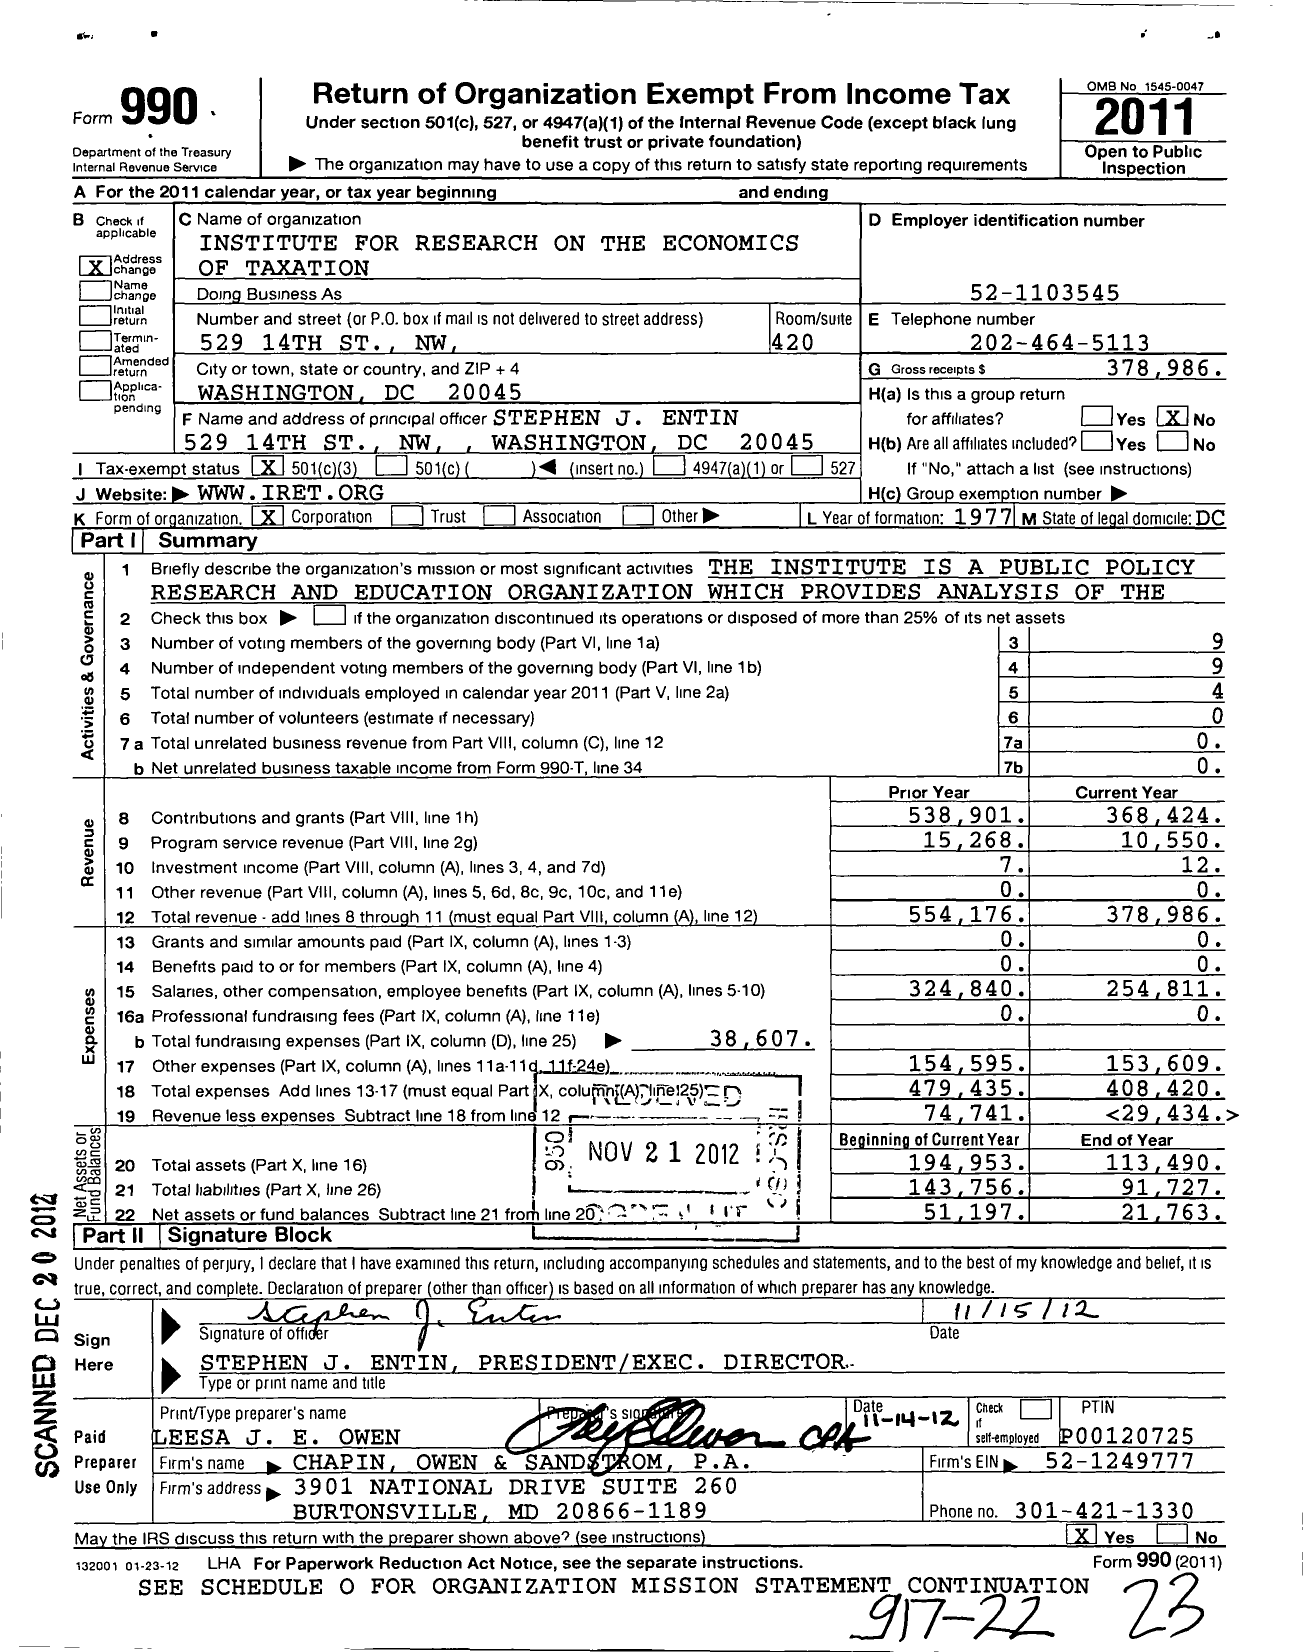 Image of first page of 2011 Form 990 for Institute for Research on the Economics of Taxation